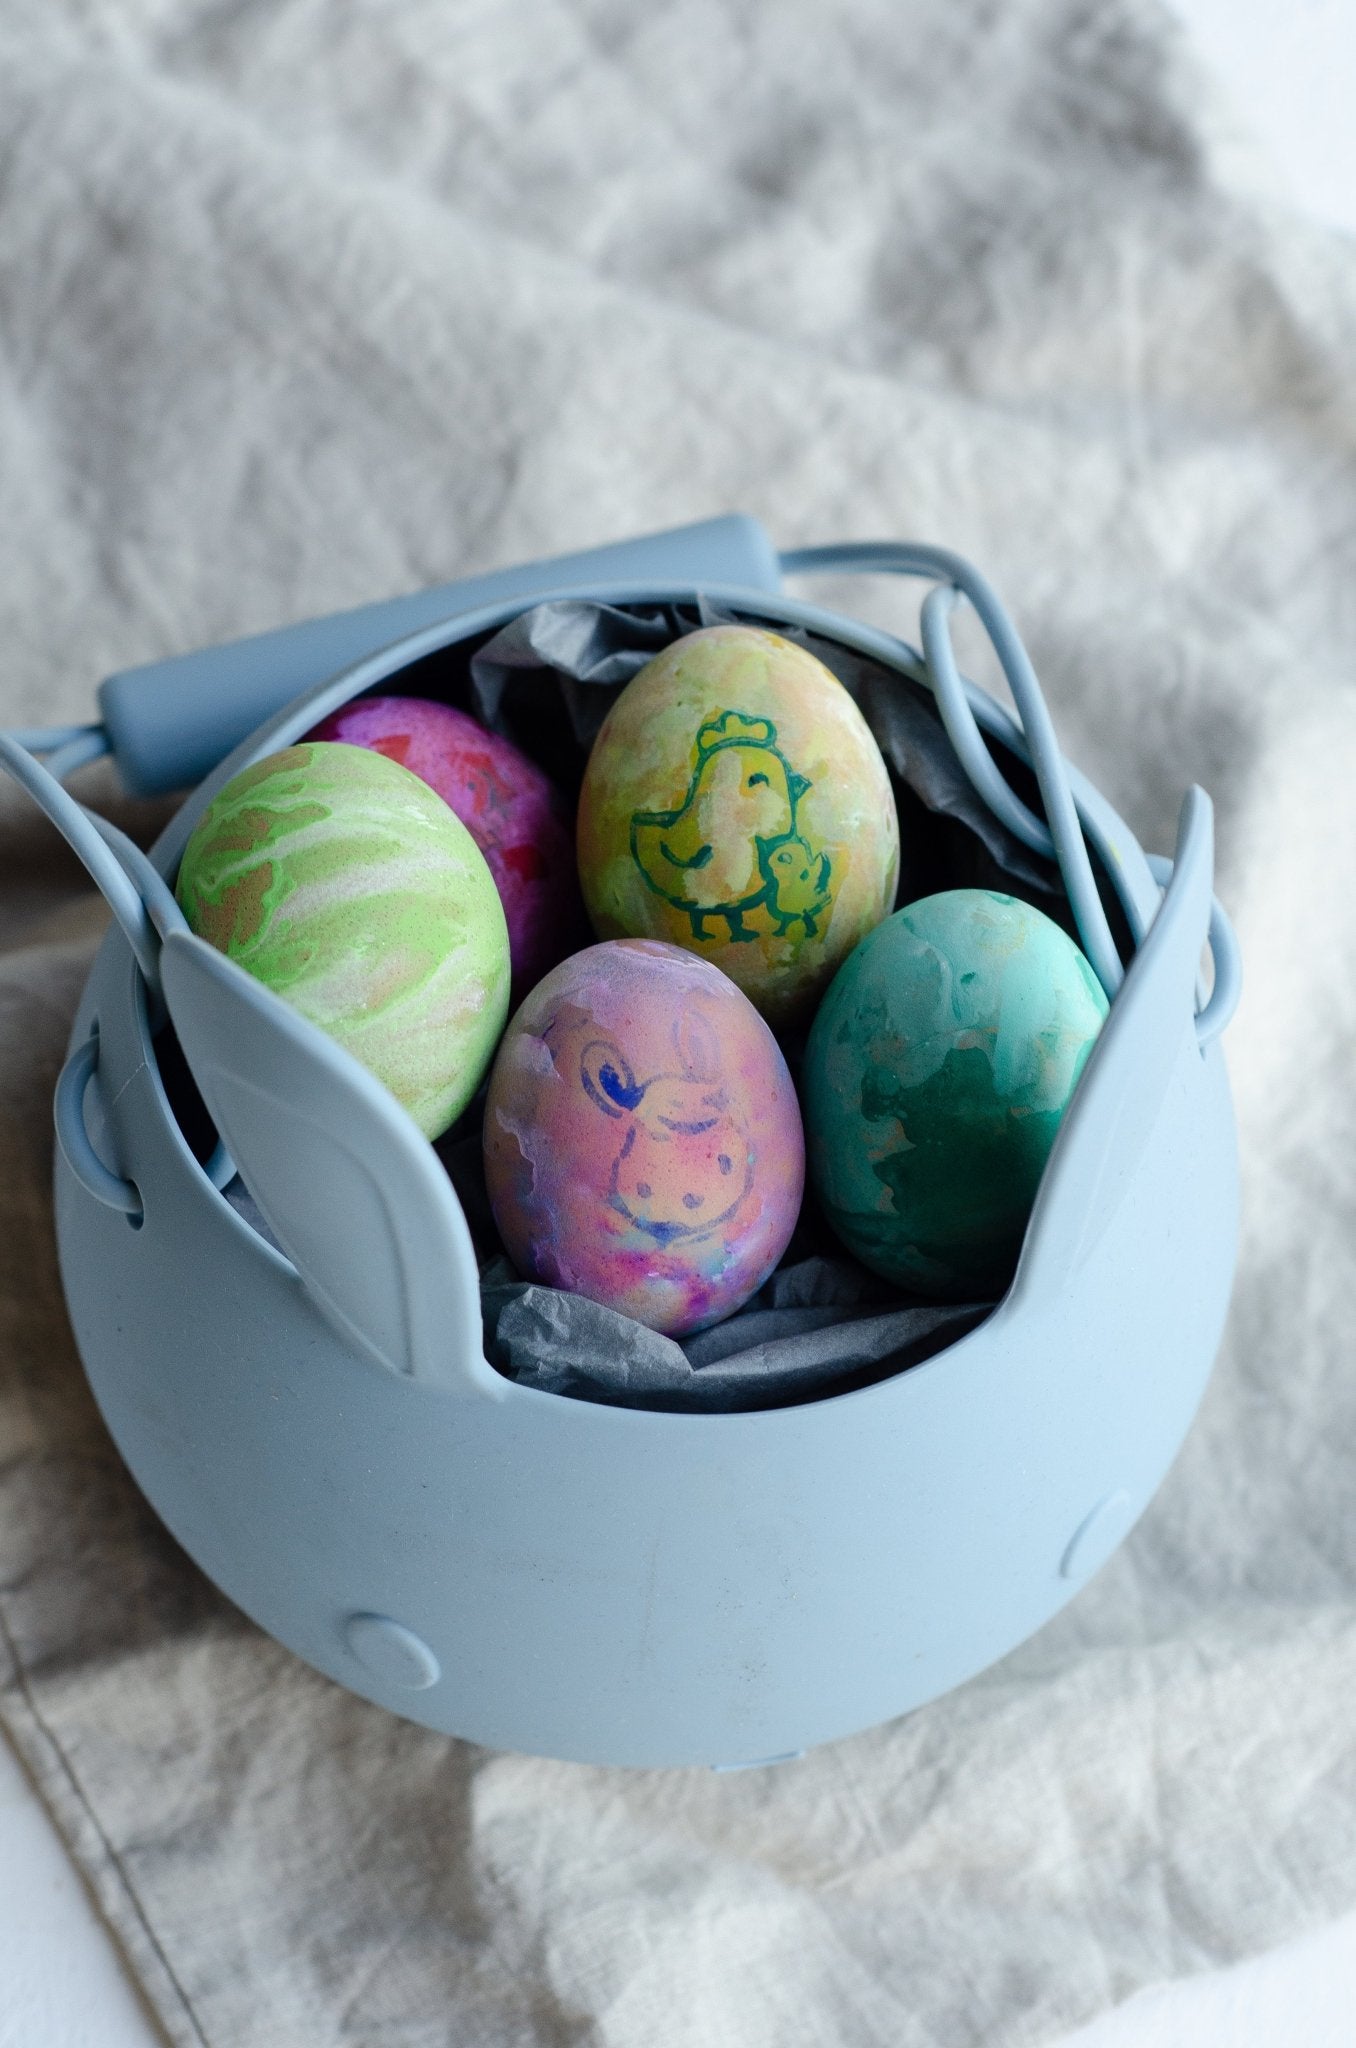 Let Art Meet Easter With This Stunning DIY Easter Egg Deco Project!